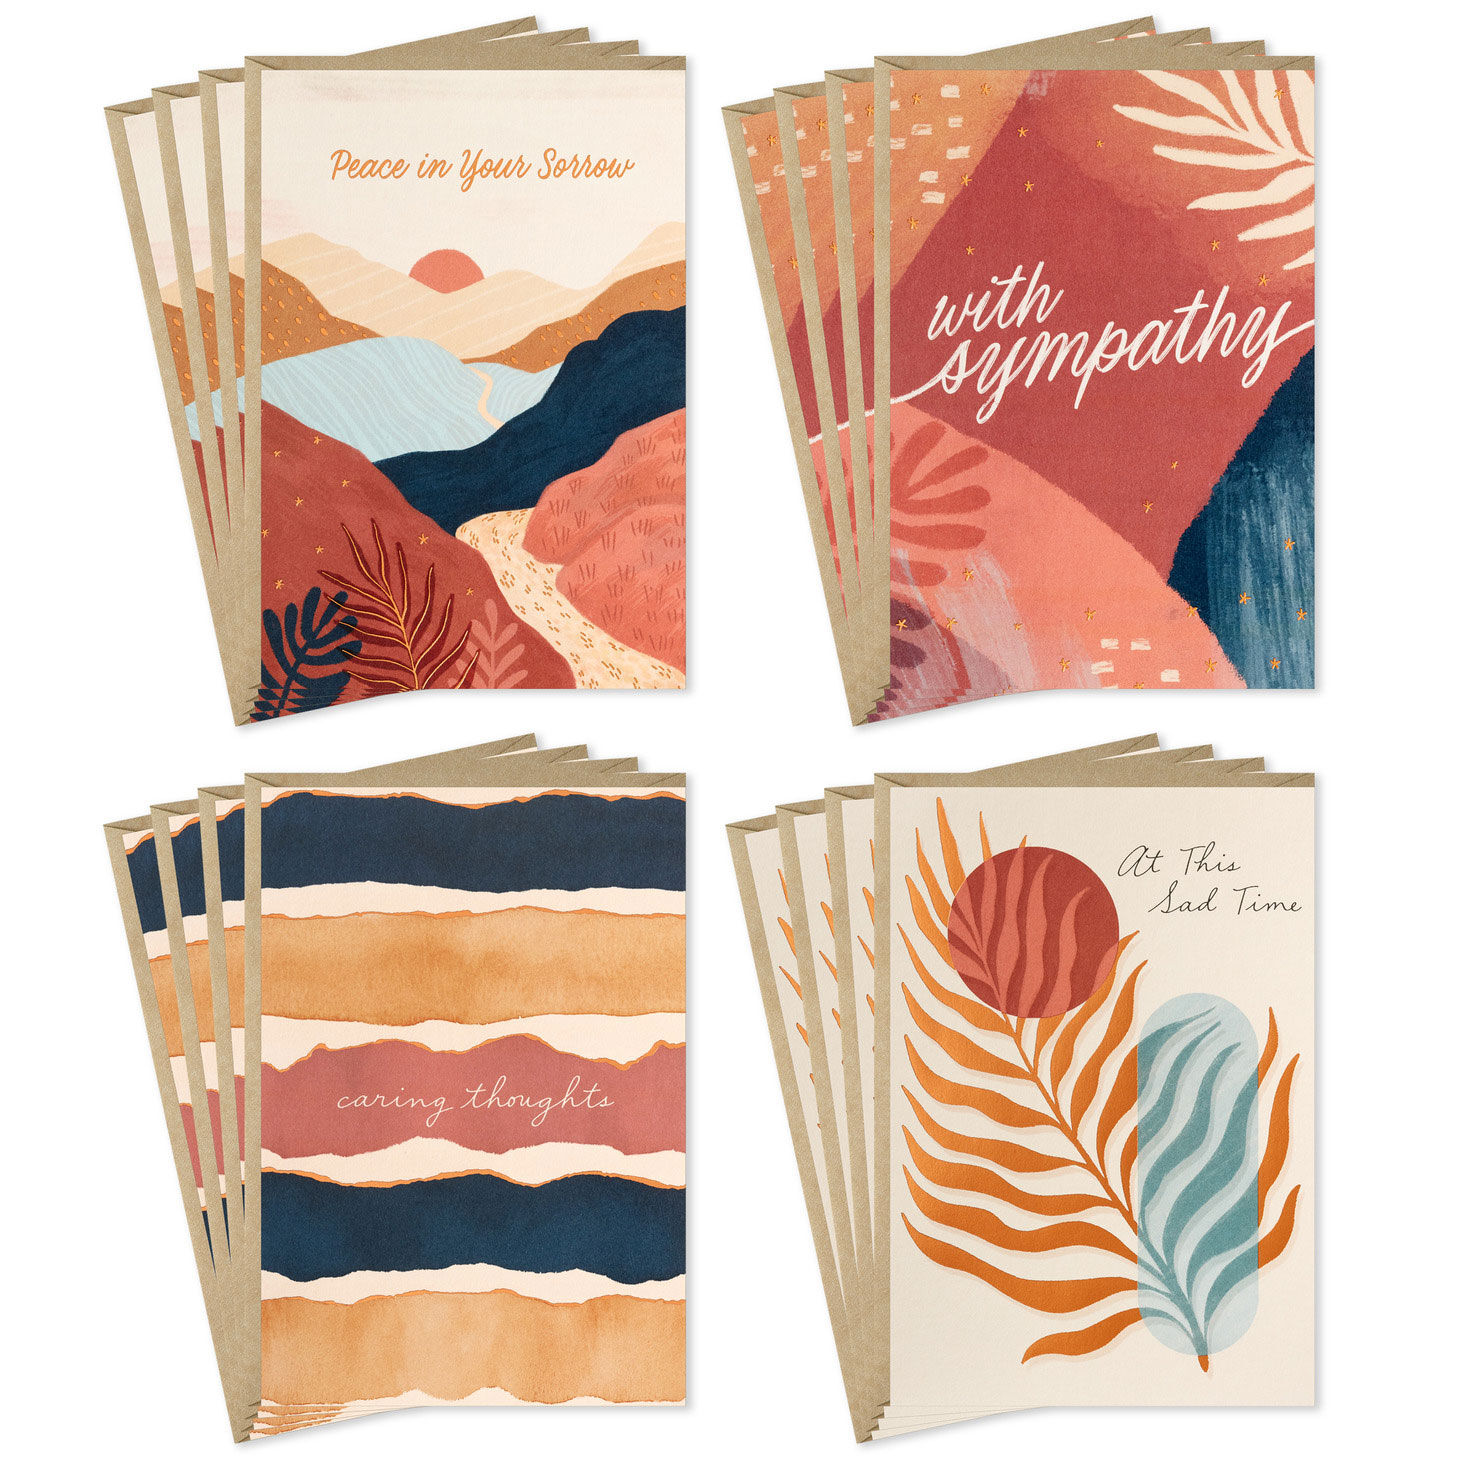 Serene Nature Boxed Sympathy Cards Assortment, Pack of 16 for only USD 9.99 | Hallmark